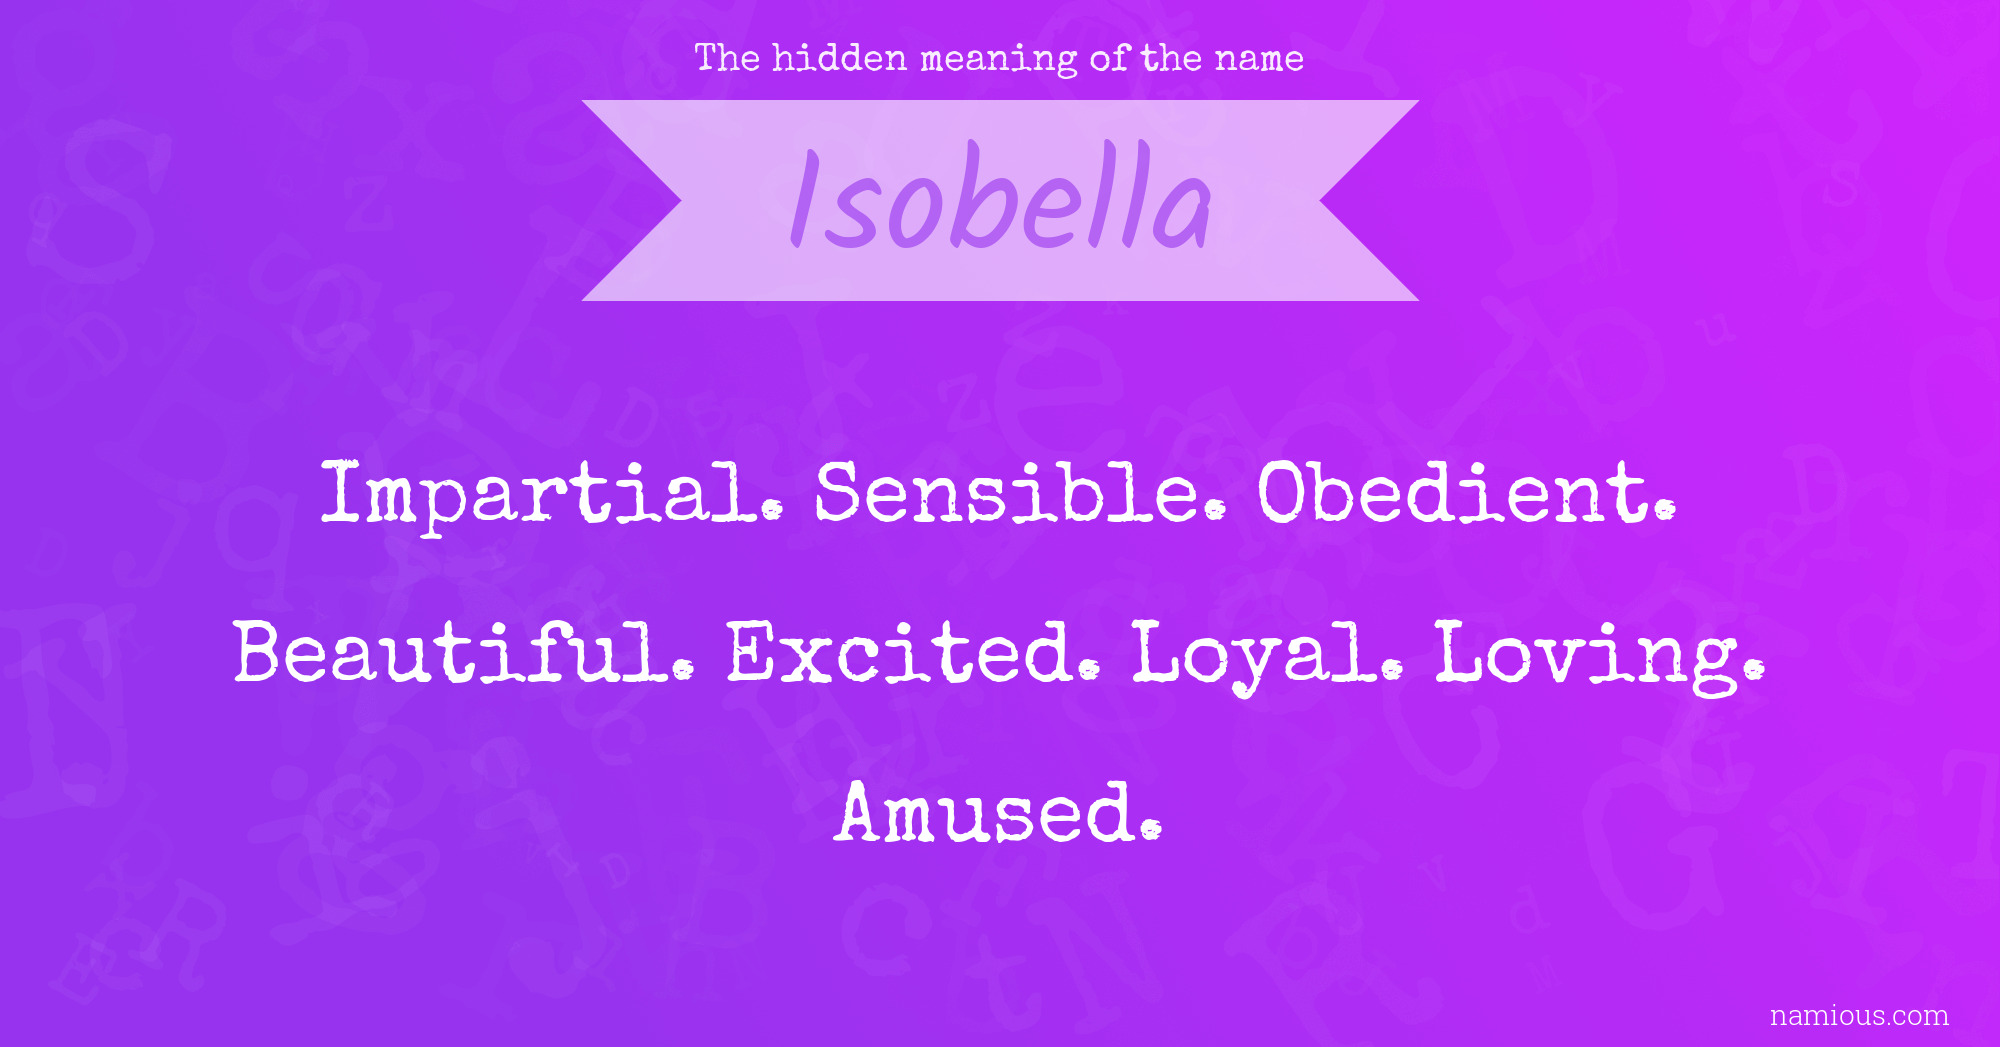 The hidden meaning of the name Isobella